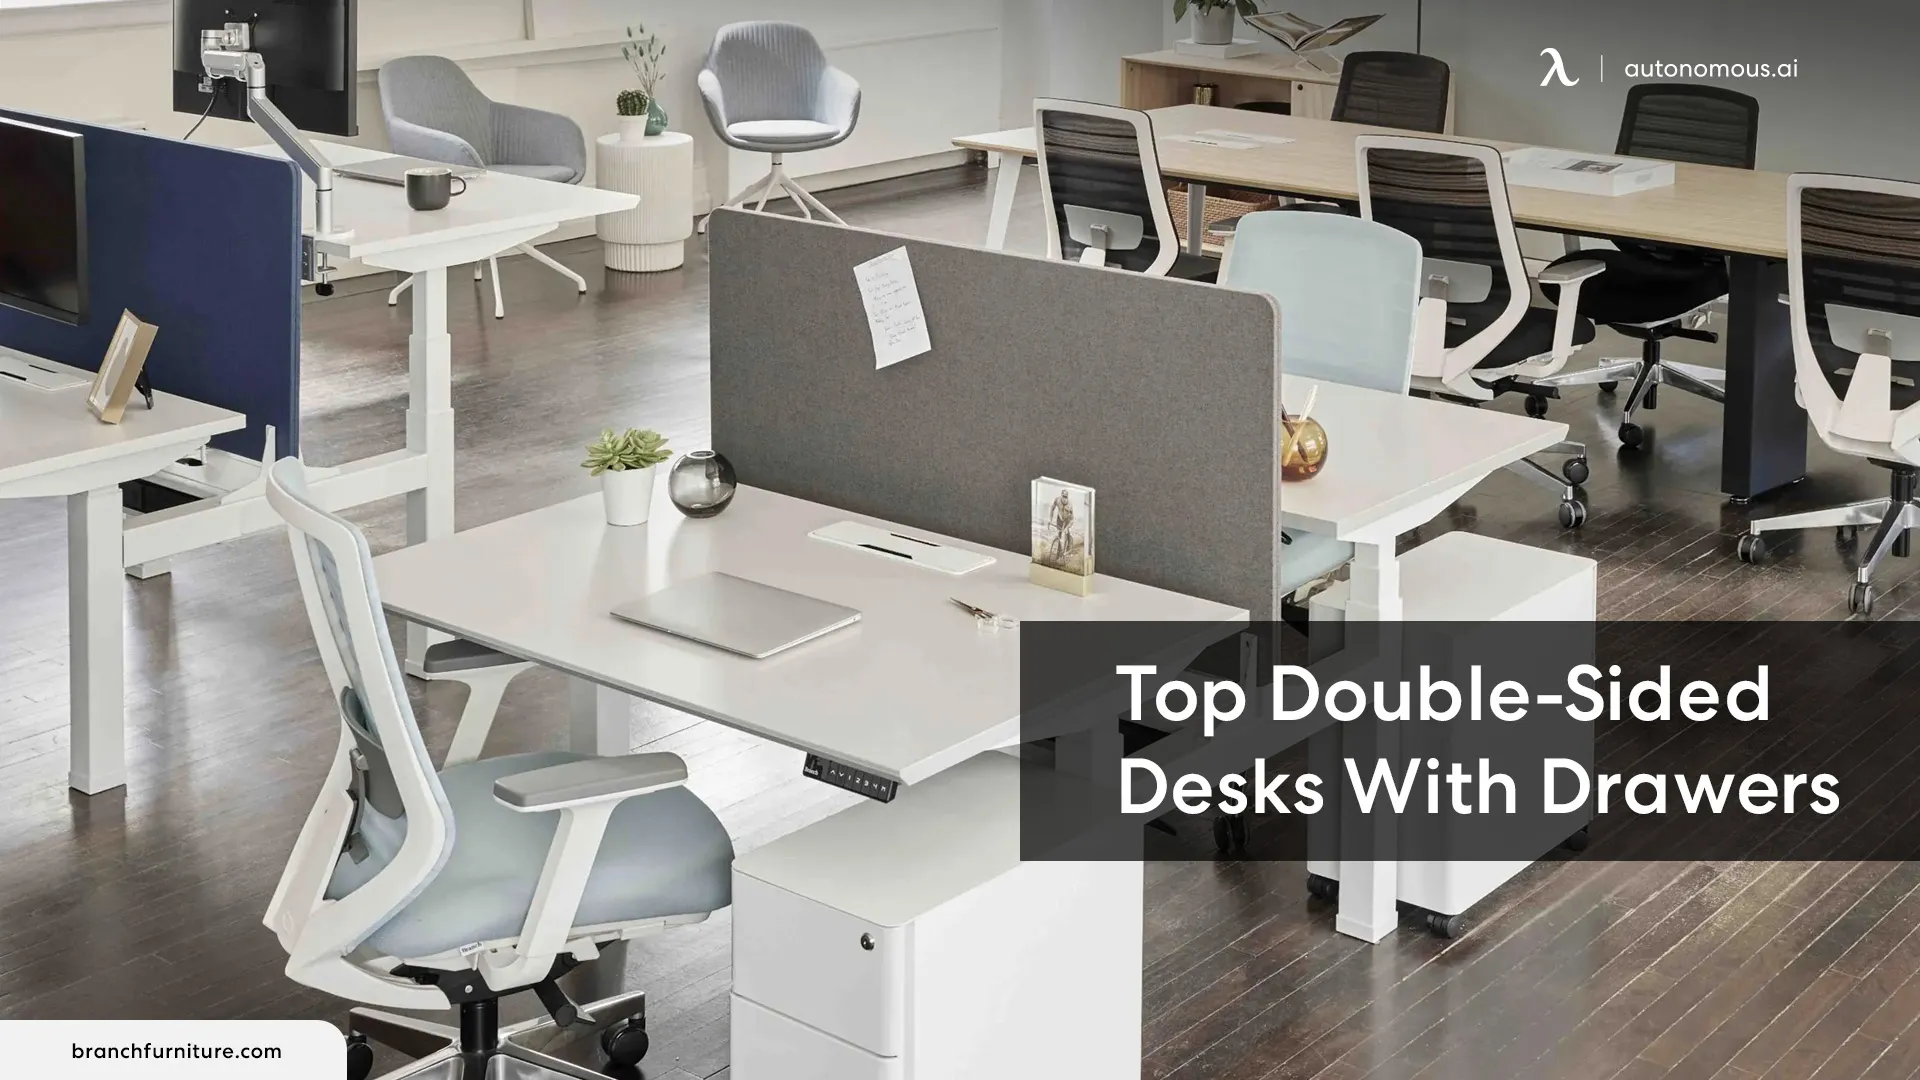 The Best Models of Double-Sided Desks With Drawers